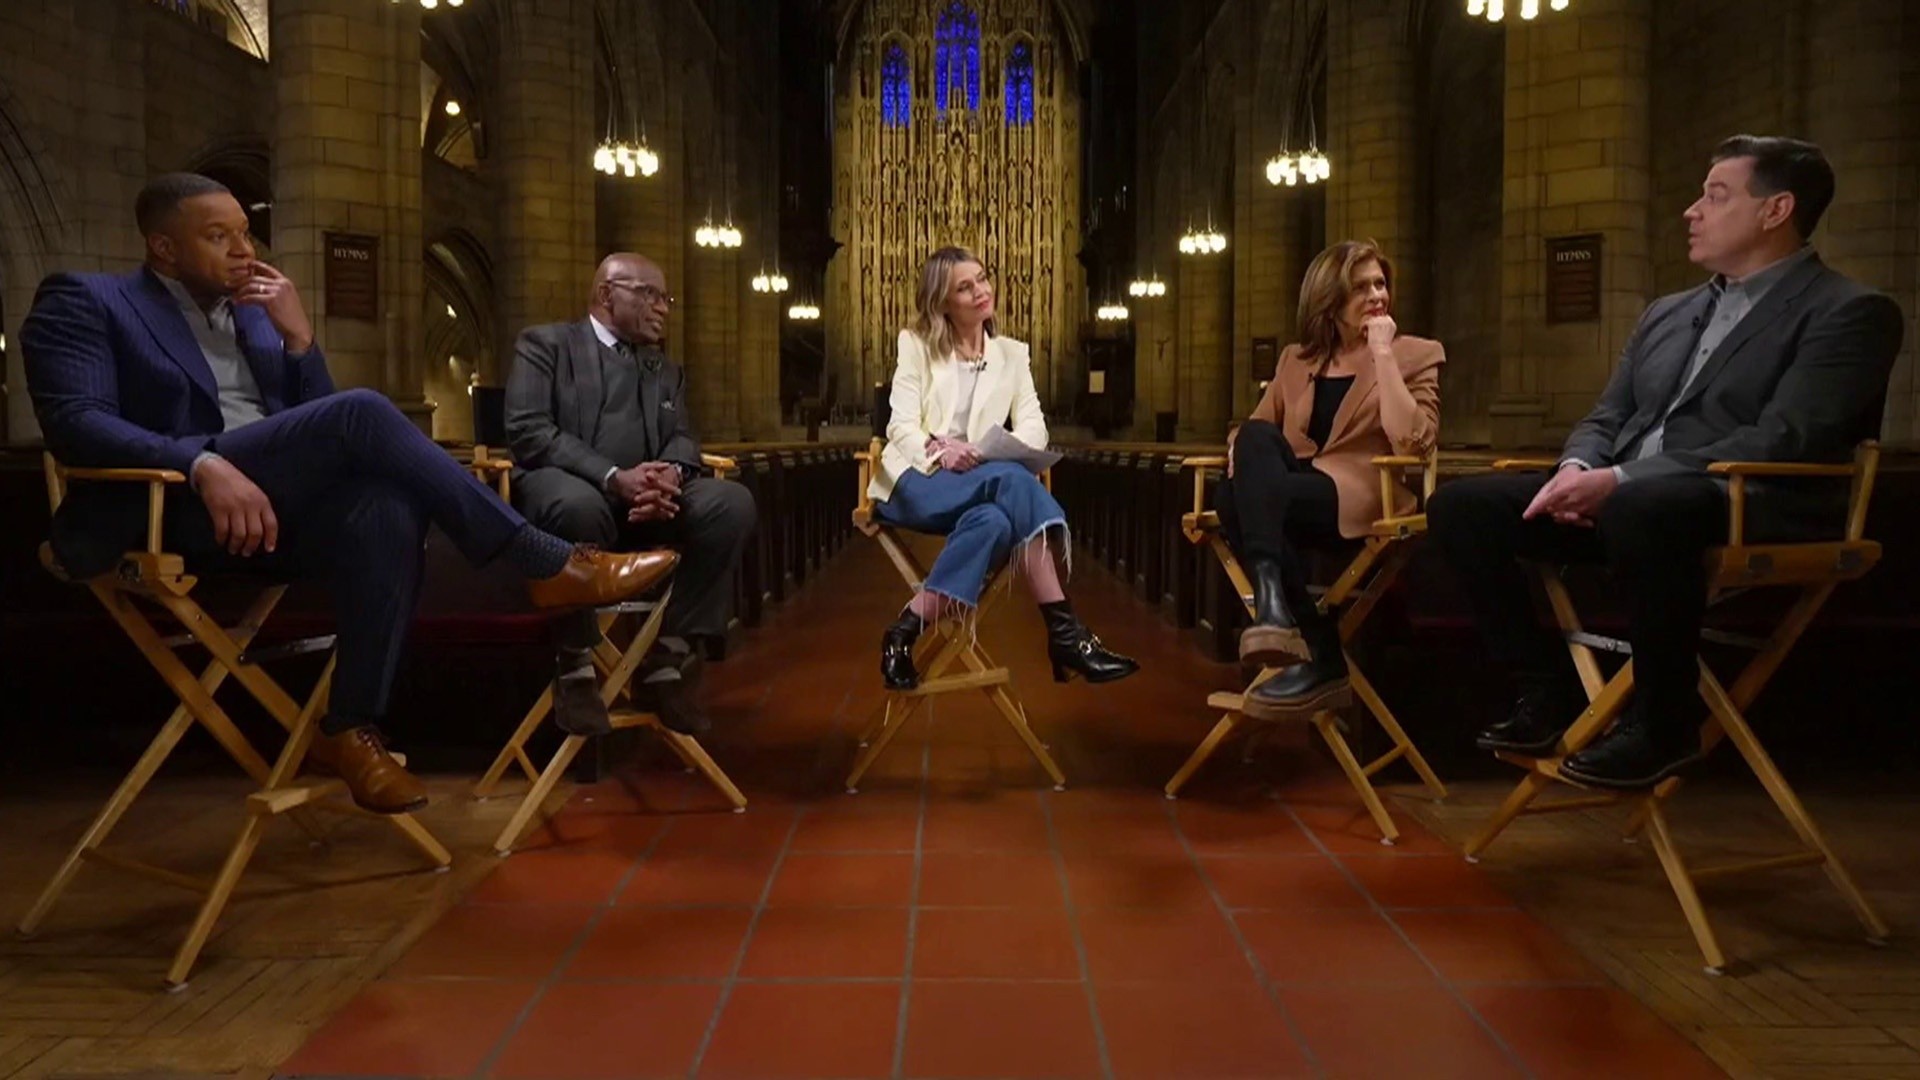 TODAY anchors share their deeply personal stories of faith